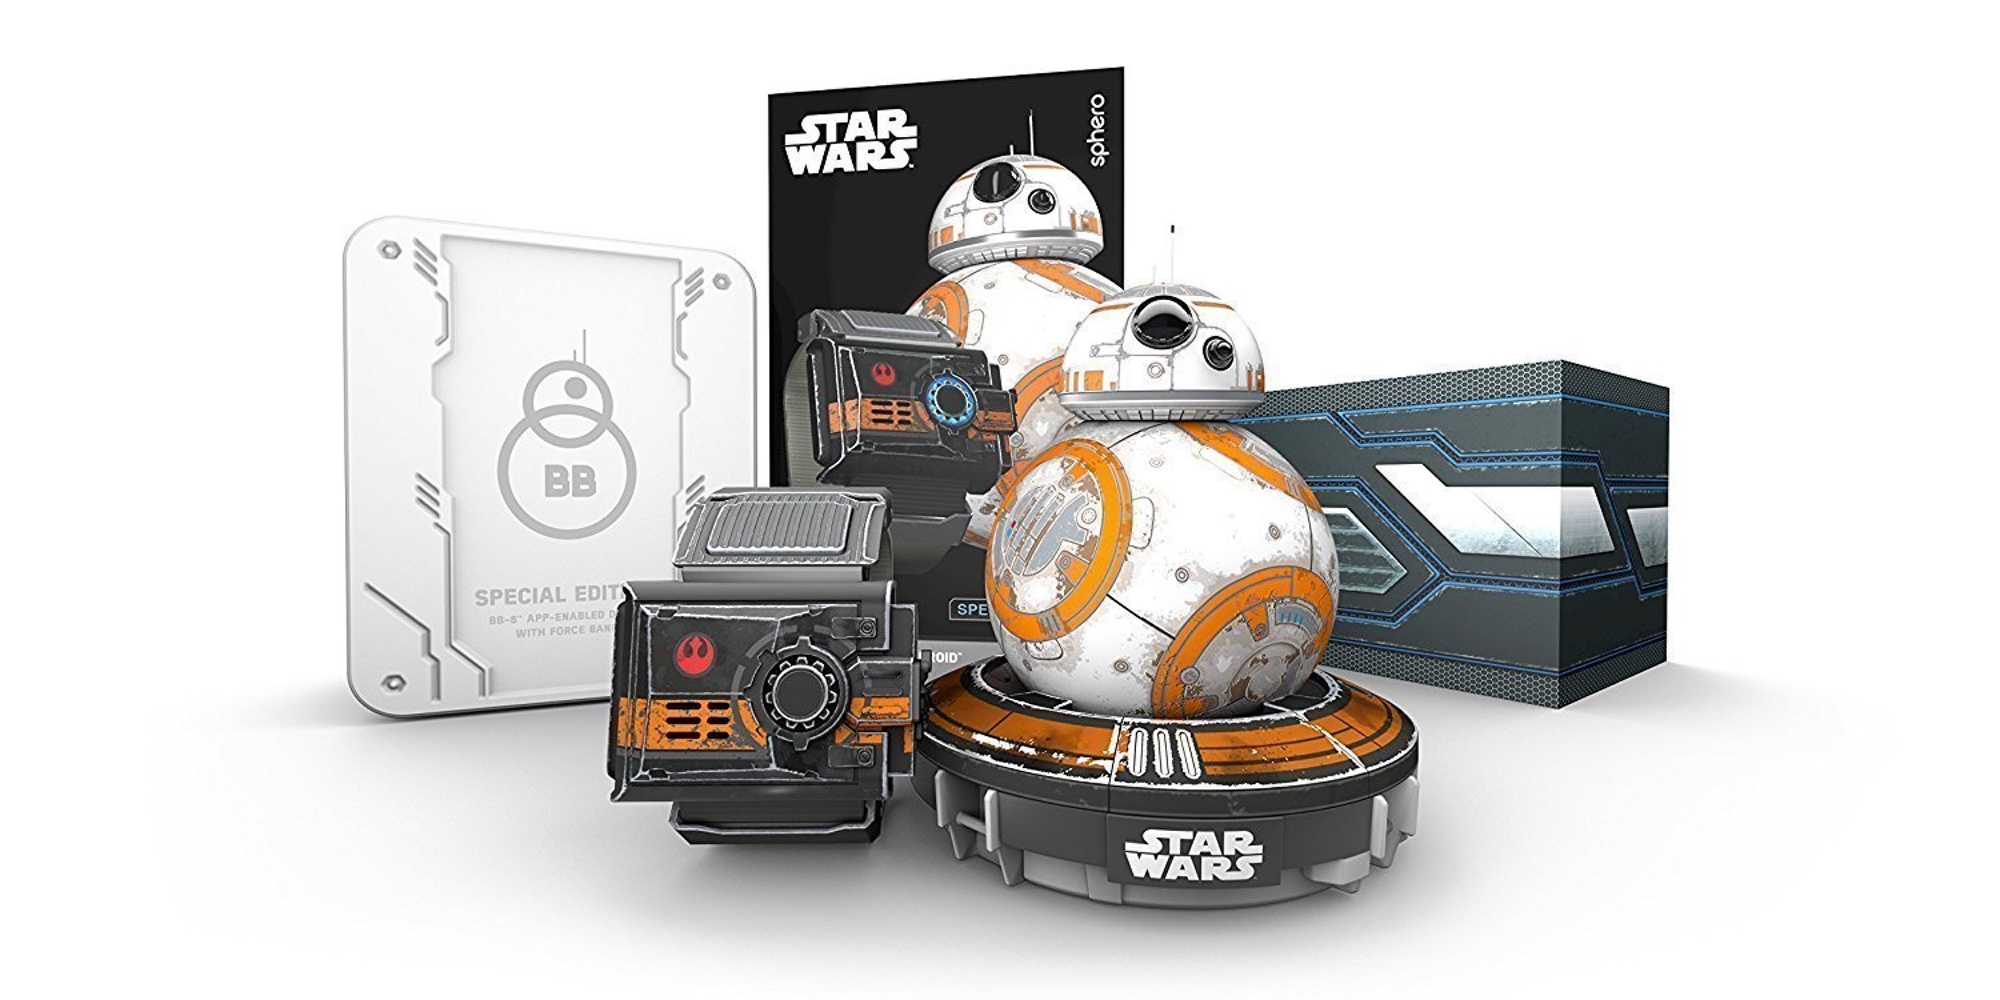 https://9to5toys.com/wp-content/uploads/sites/5/2017/06/sphero-star-wars-bb-8-app-controlled-robot-with-star-wars-force-band.jpg